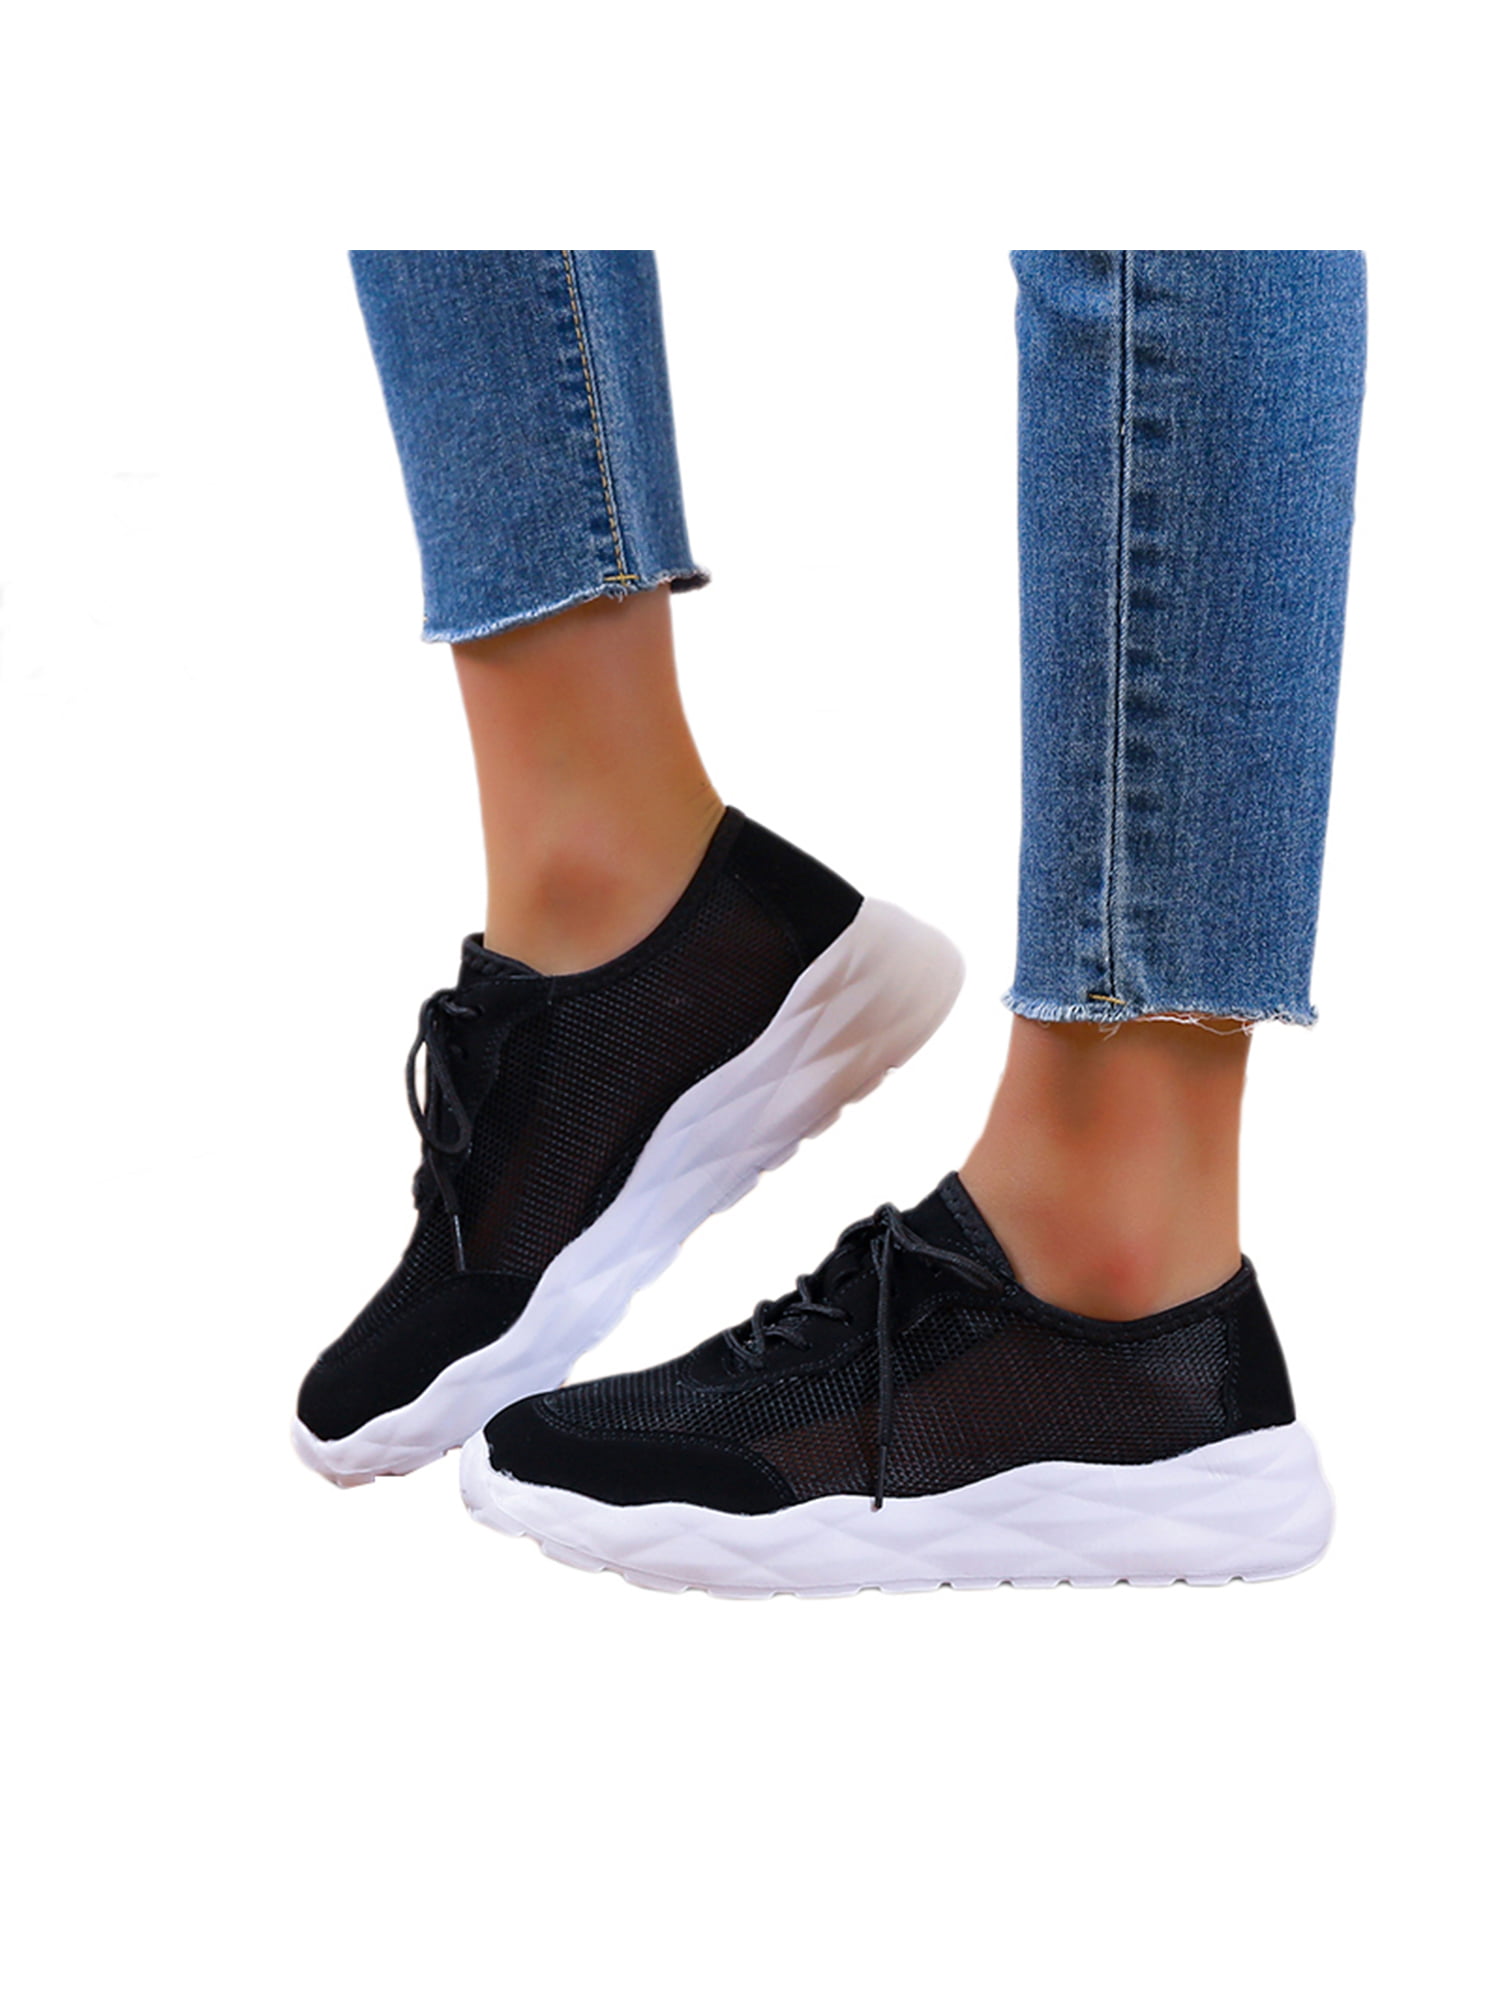 SIMANLAN Womens Shoe Fitness Workout Shoes Sport Sneakers Ladies Adjustable Flats Breathable Trainers Black 6.5 - Walmart.com